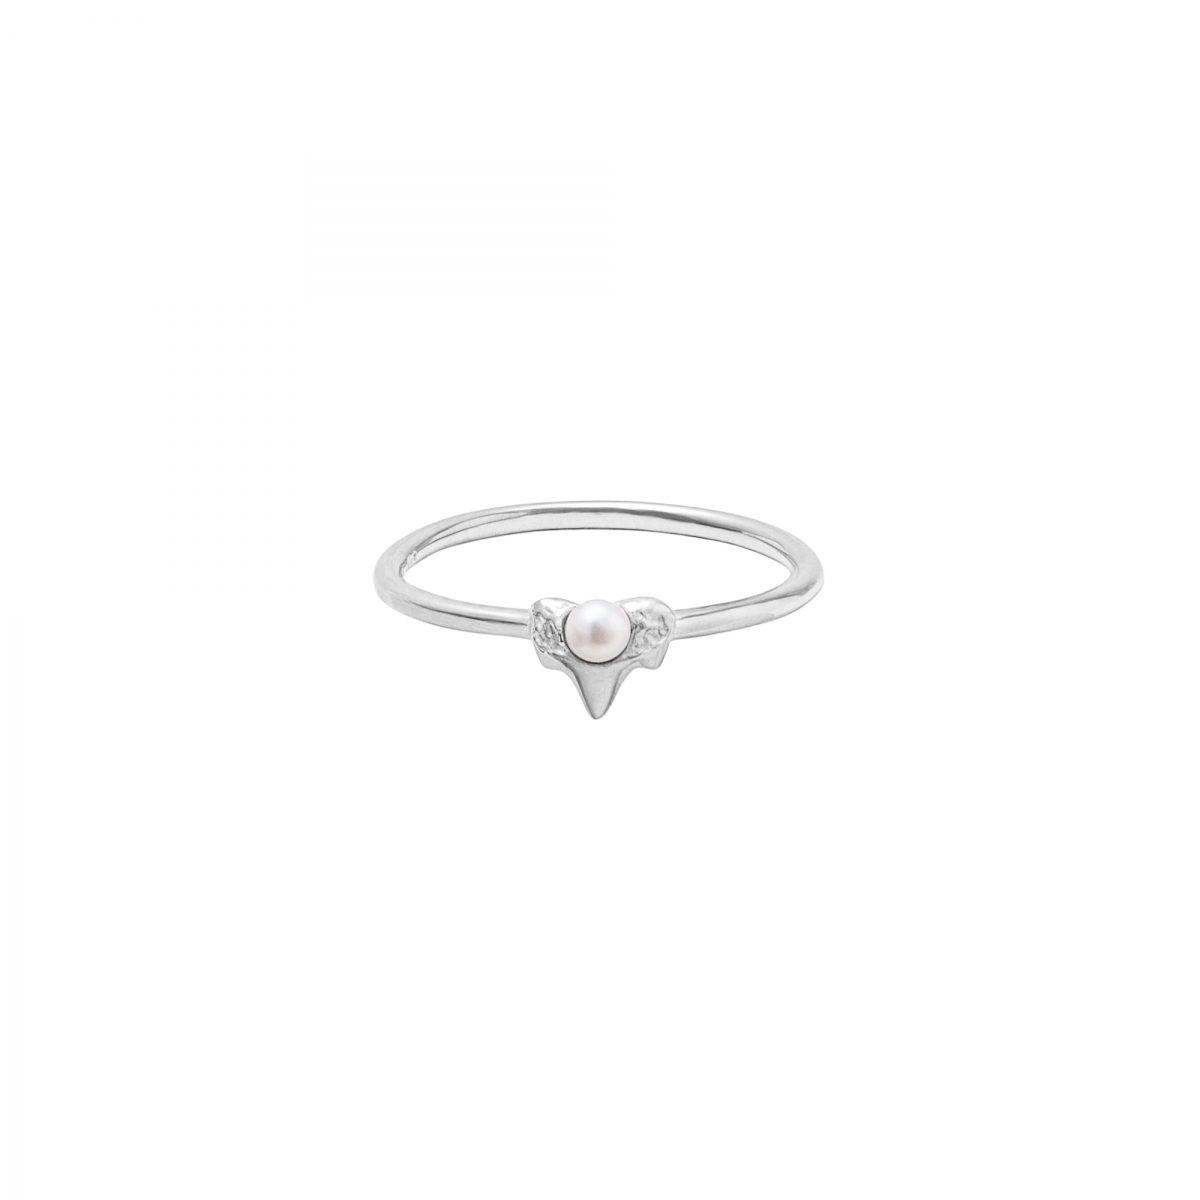 Antipearle Petite A Ring Silver